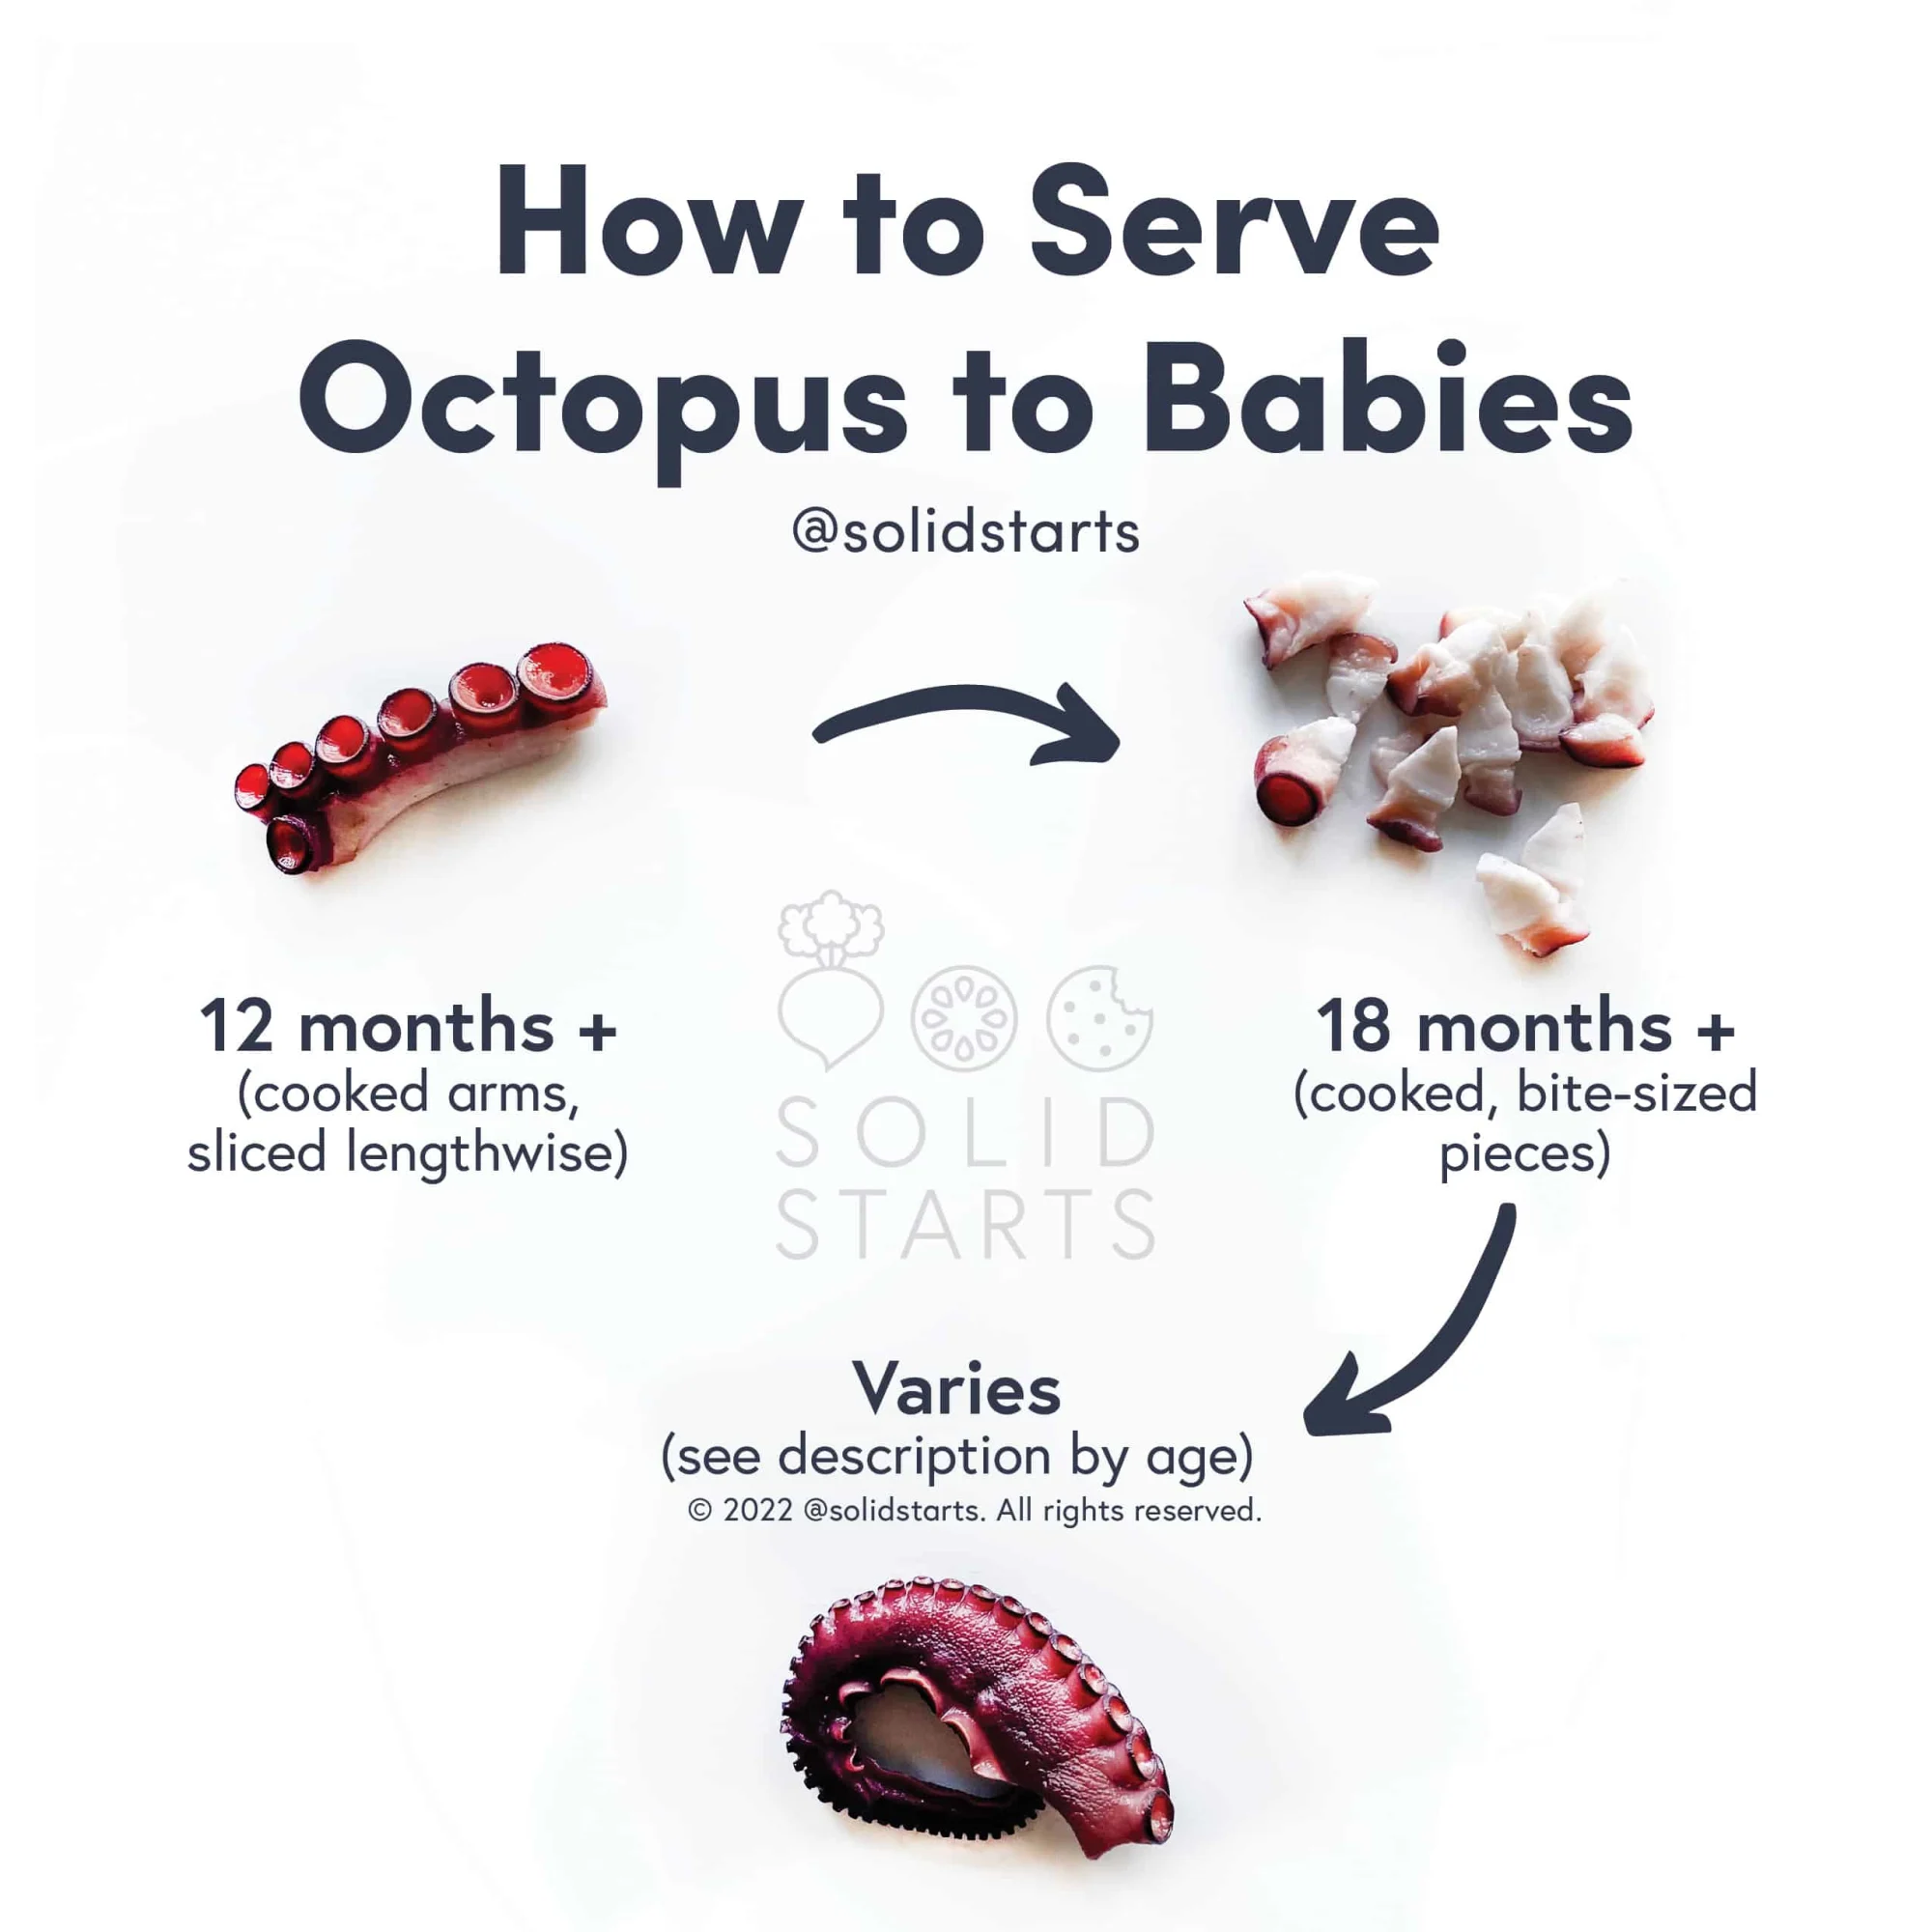 a Solid Starts infographic with the header How to Serve Octopus to Babies: cooked arms sliced lengthwise for 12 mos+, cooked bite-size pieces for 18 mos+, and small whole tentacles varies depending on child's eating ability